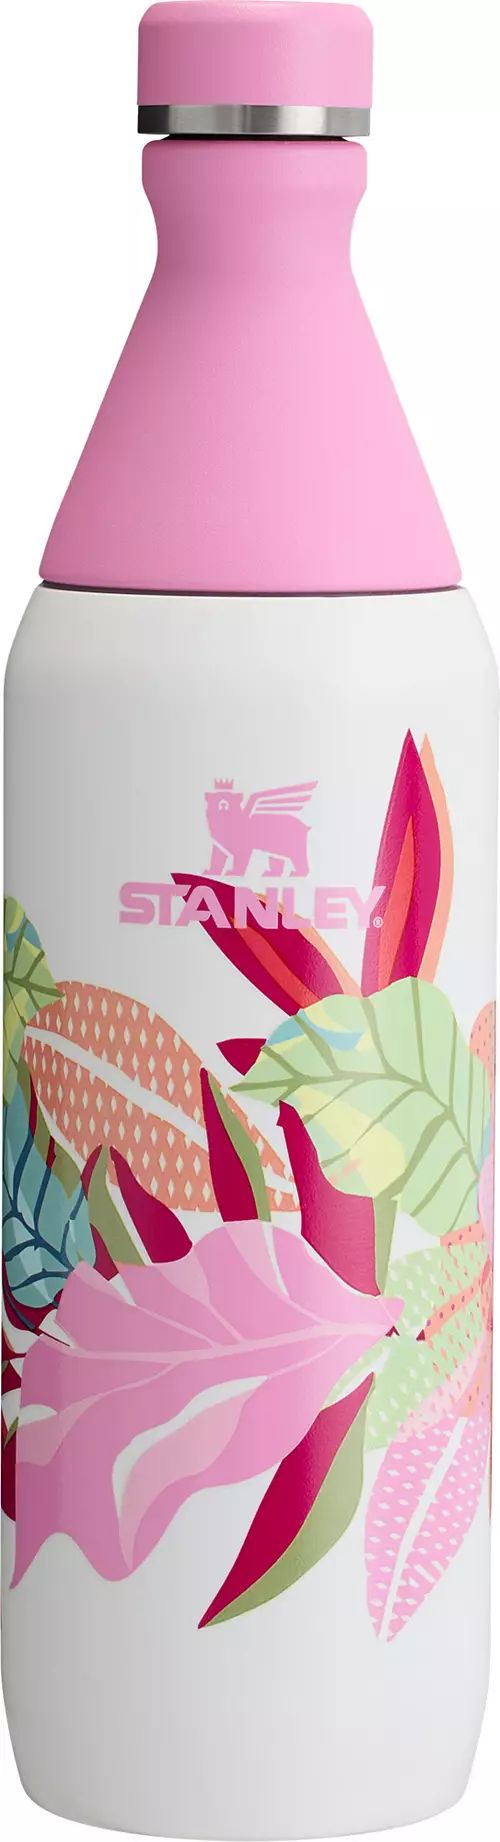 Stanley 20 oz. All Day Slim Bottle - Mother's Day Collection | Dick's Sporting Goods